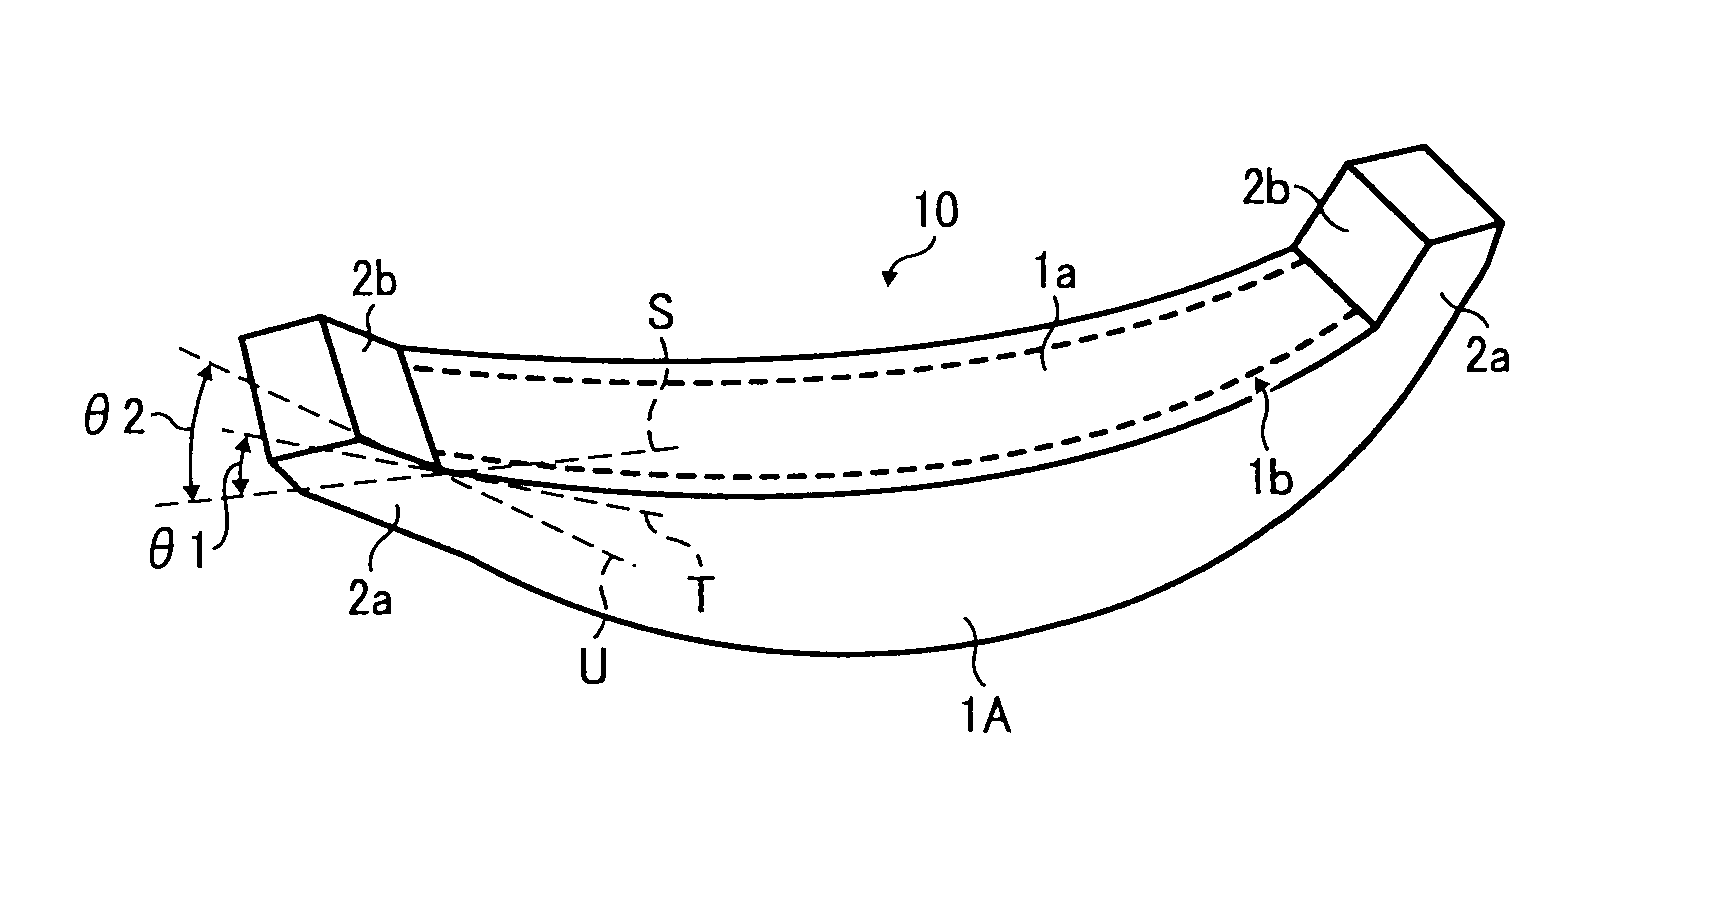 Plastic optical element, nest structure, die, optical scan apparatus and image formation apparatus